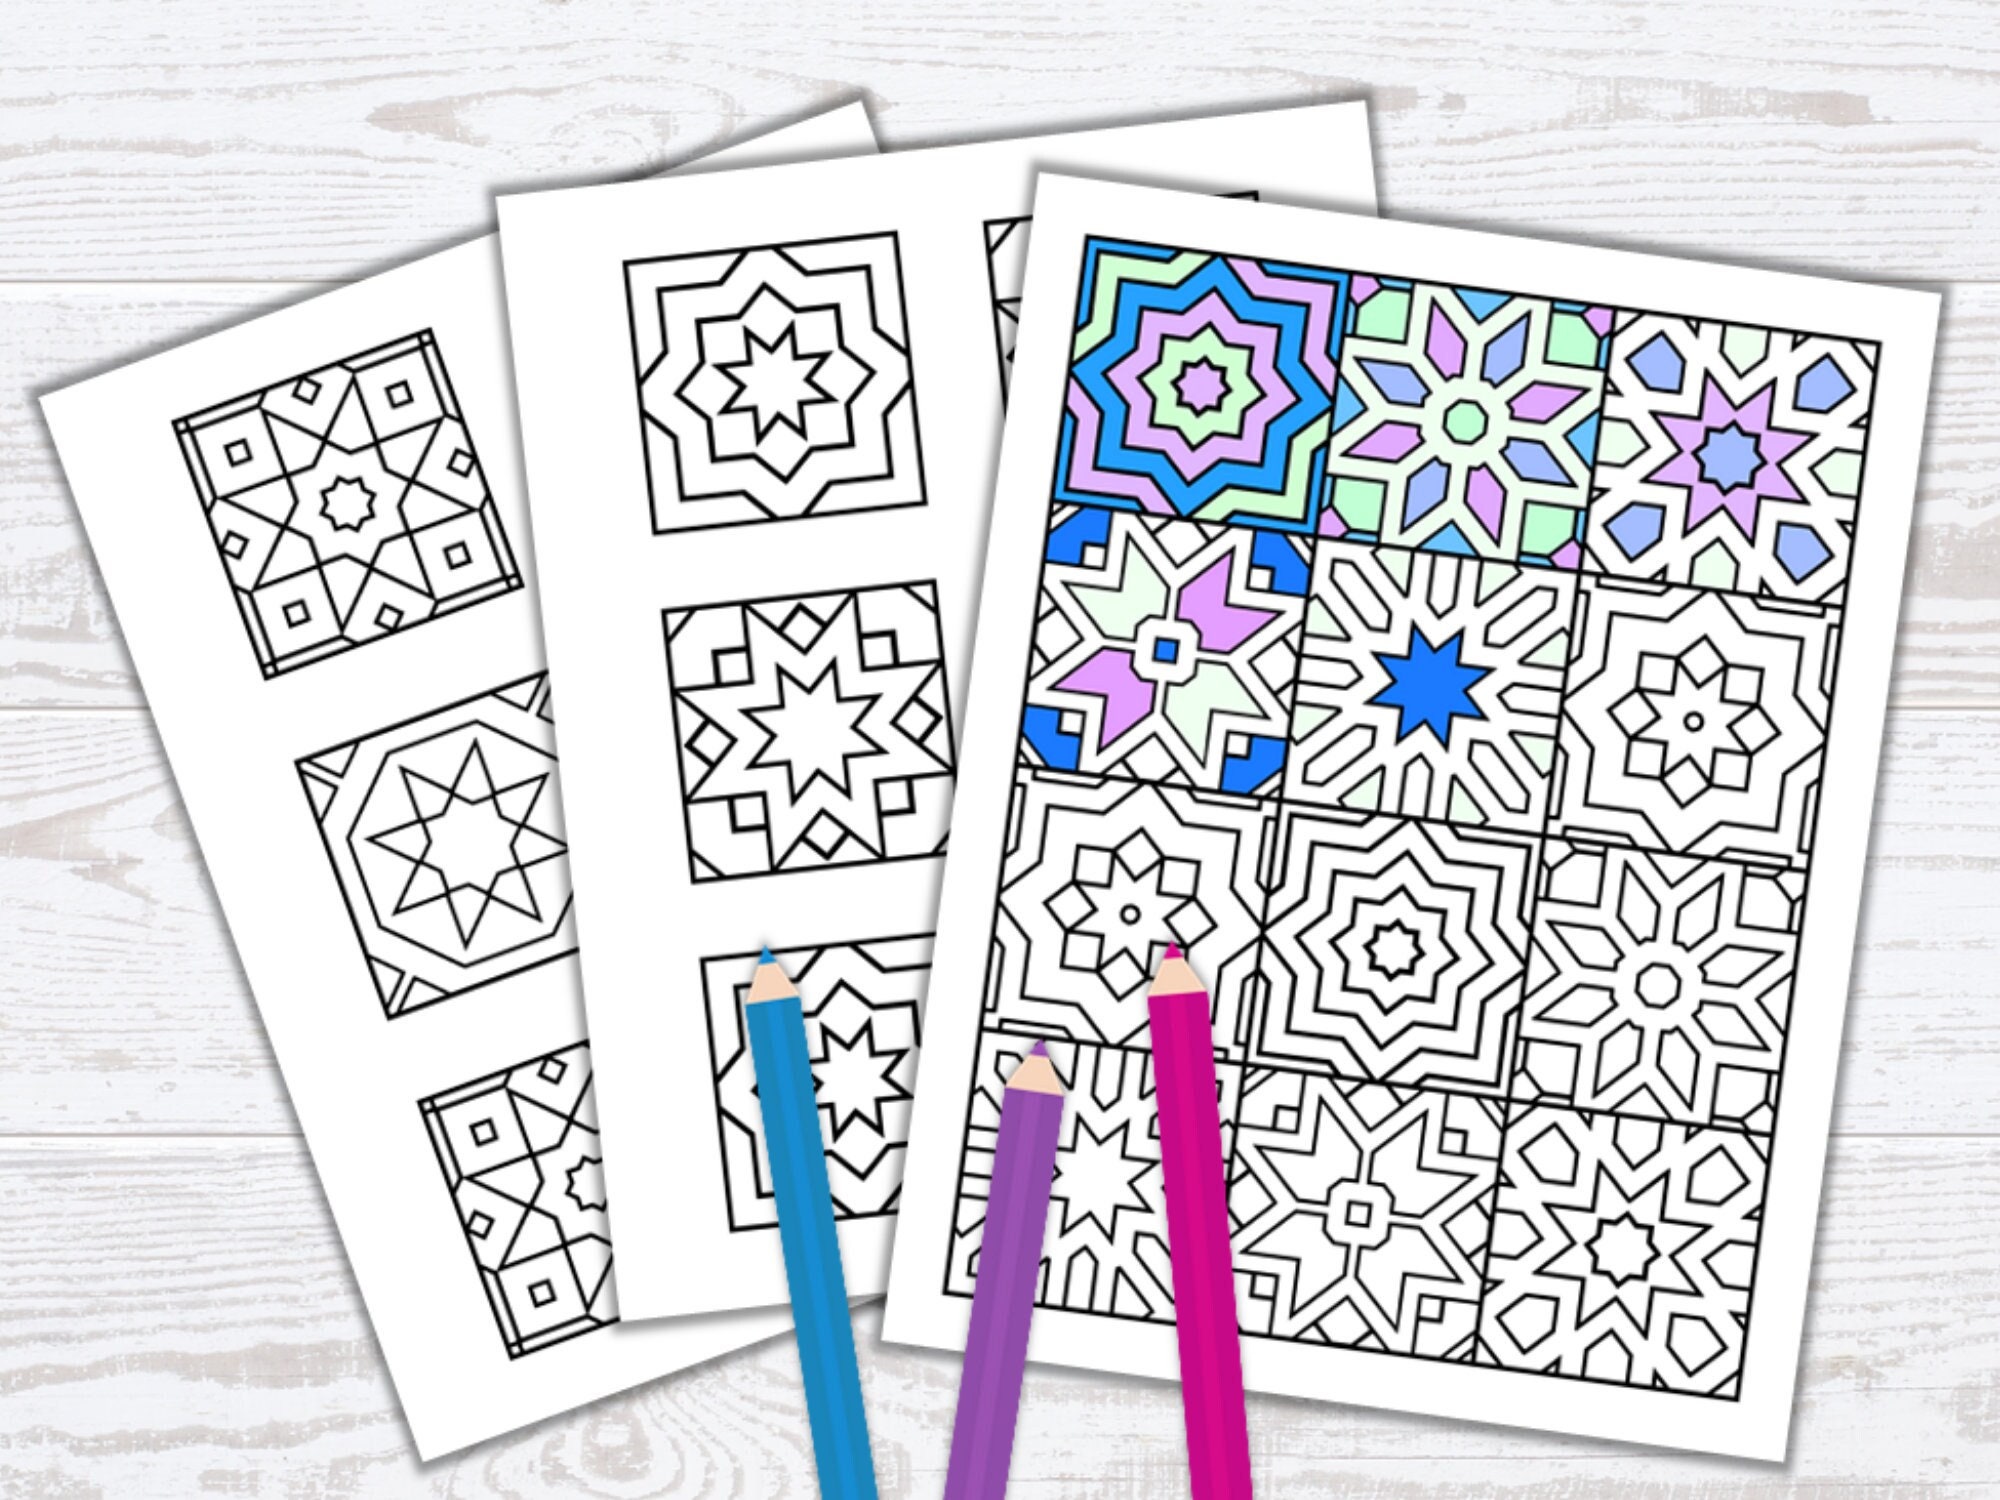 Mosaic tile coloring pages adult coloring page moroccan tile zen coloring pages islamic design printable pdf instant download download now